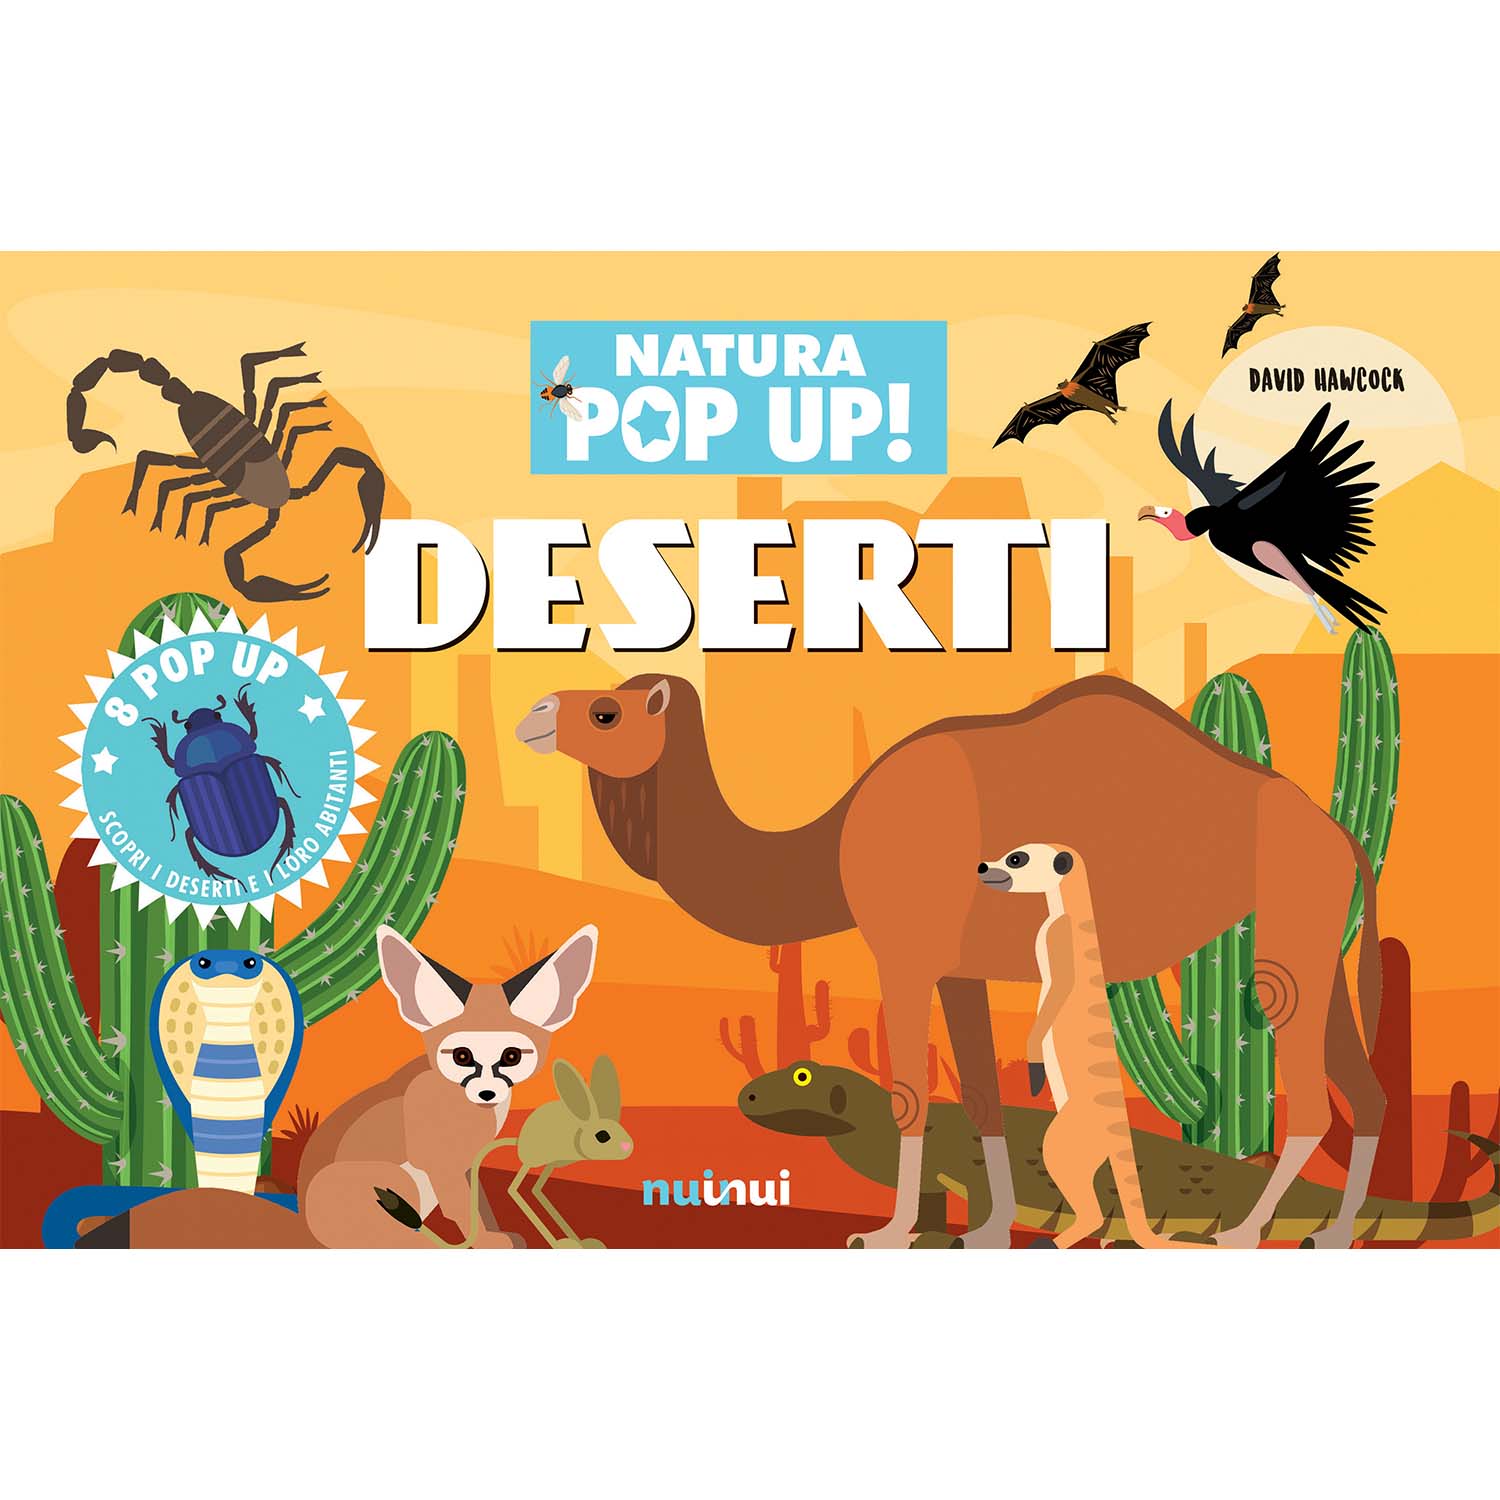 Nature in pop up - Deserts